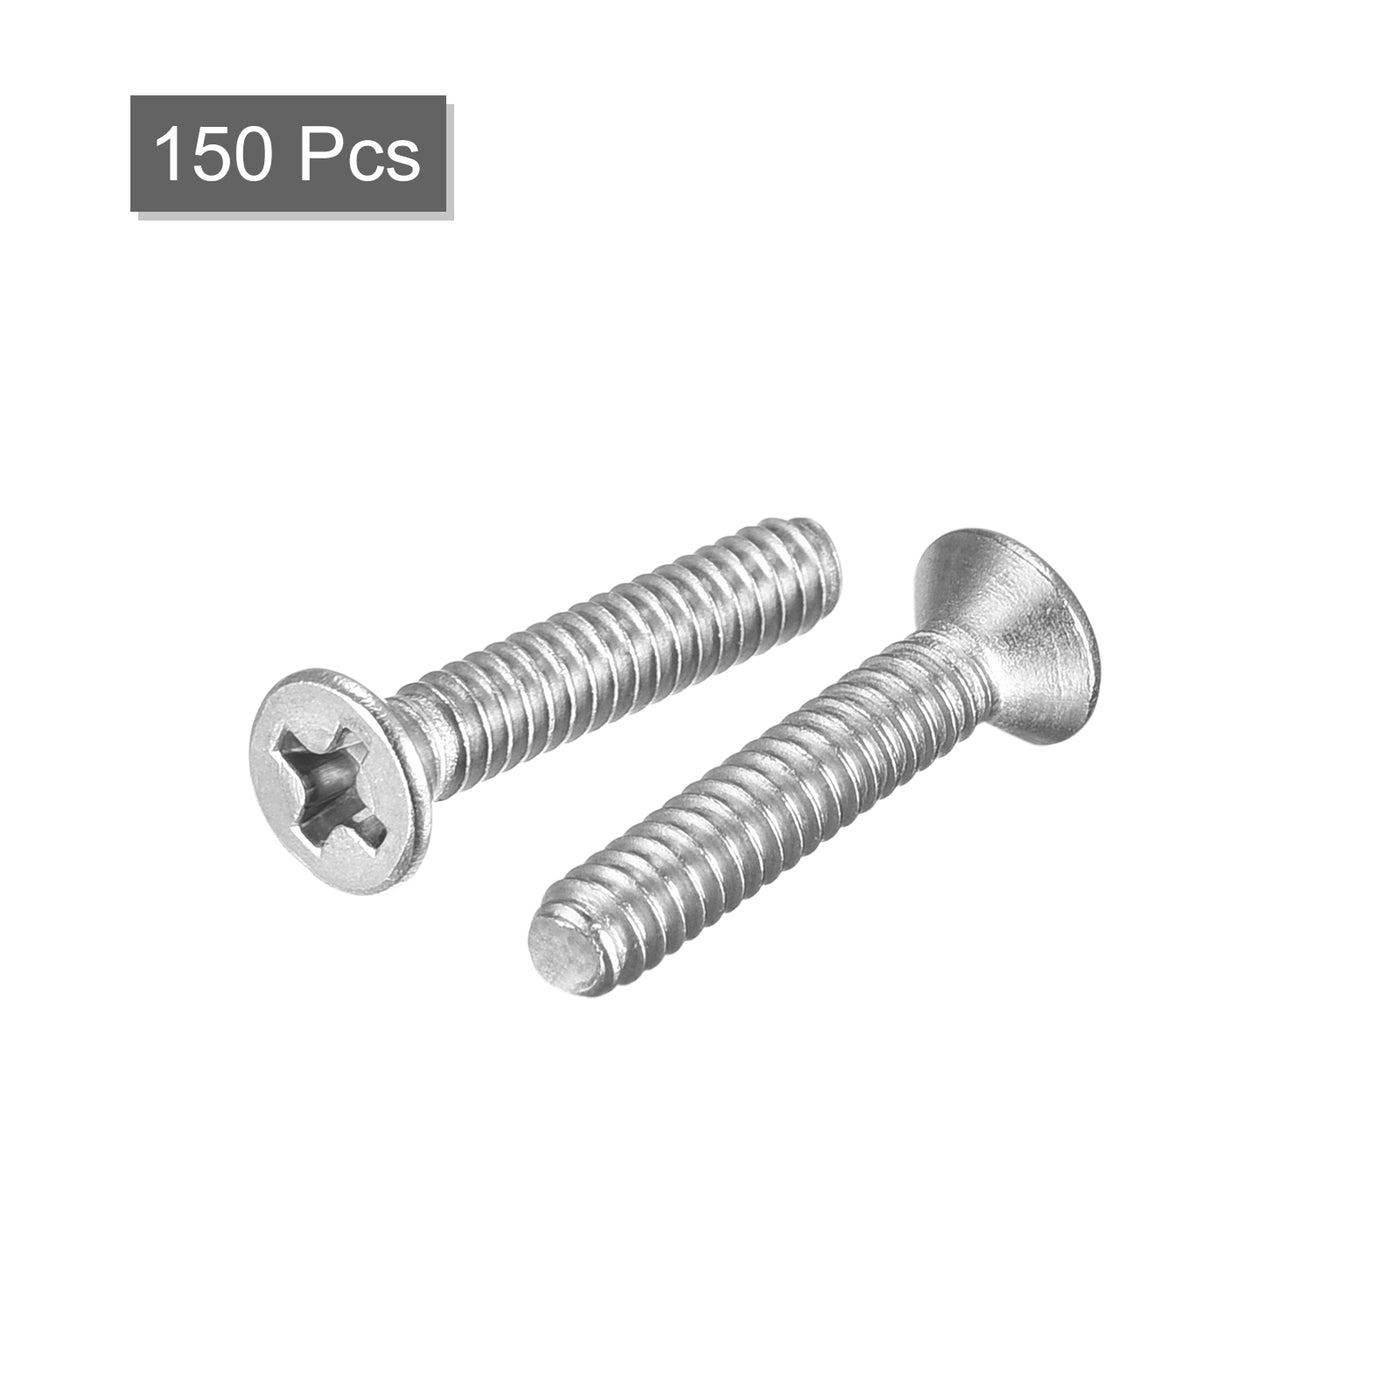 Uxcell Uxcell 6#-32x7/8" Flat Head Machine Screws Phillips 304 Stainless Steel Bolts 150pcs